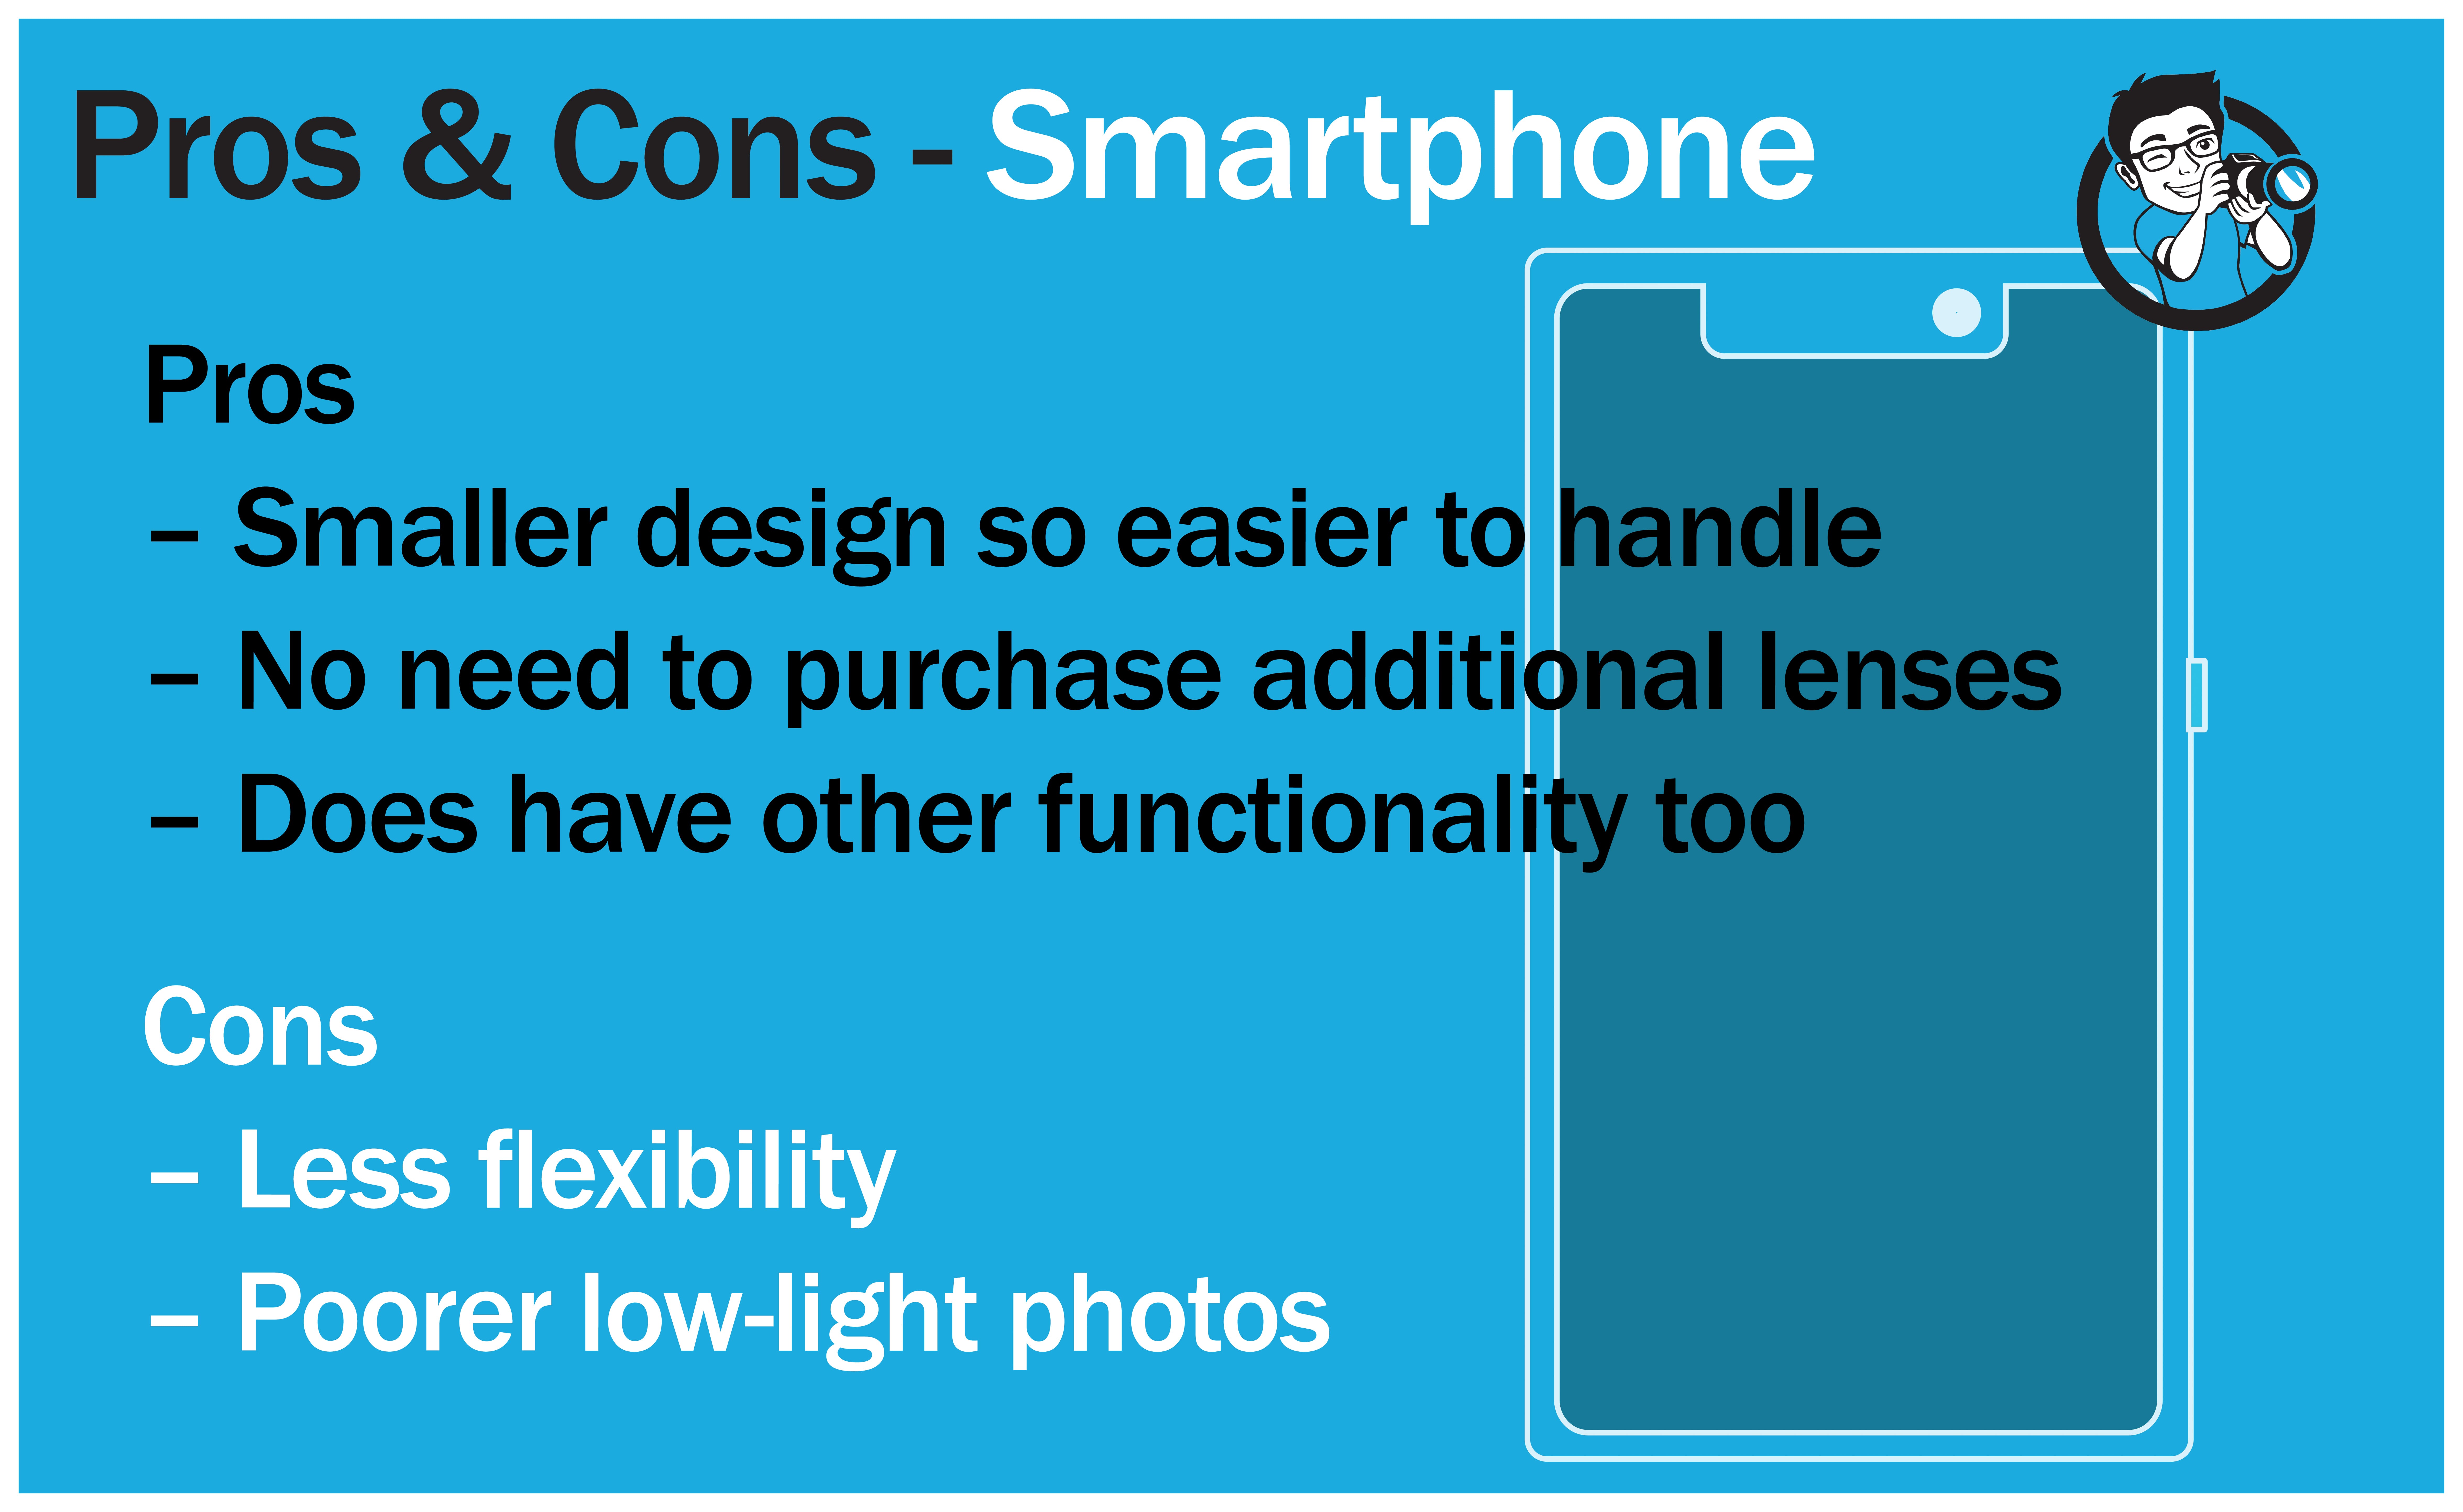 pros and cons smartphone